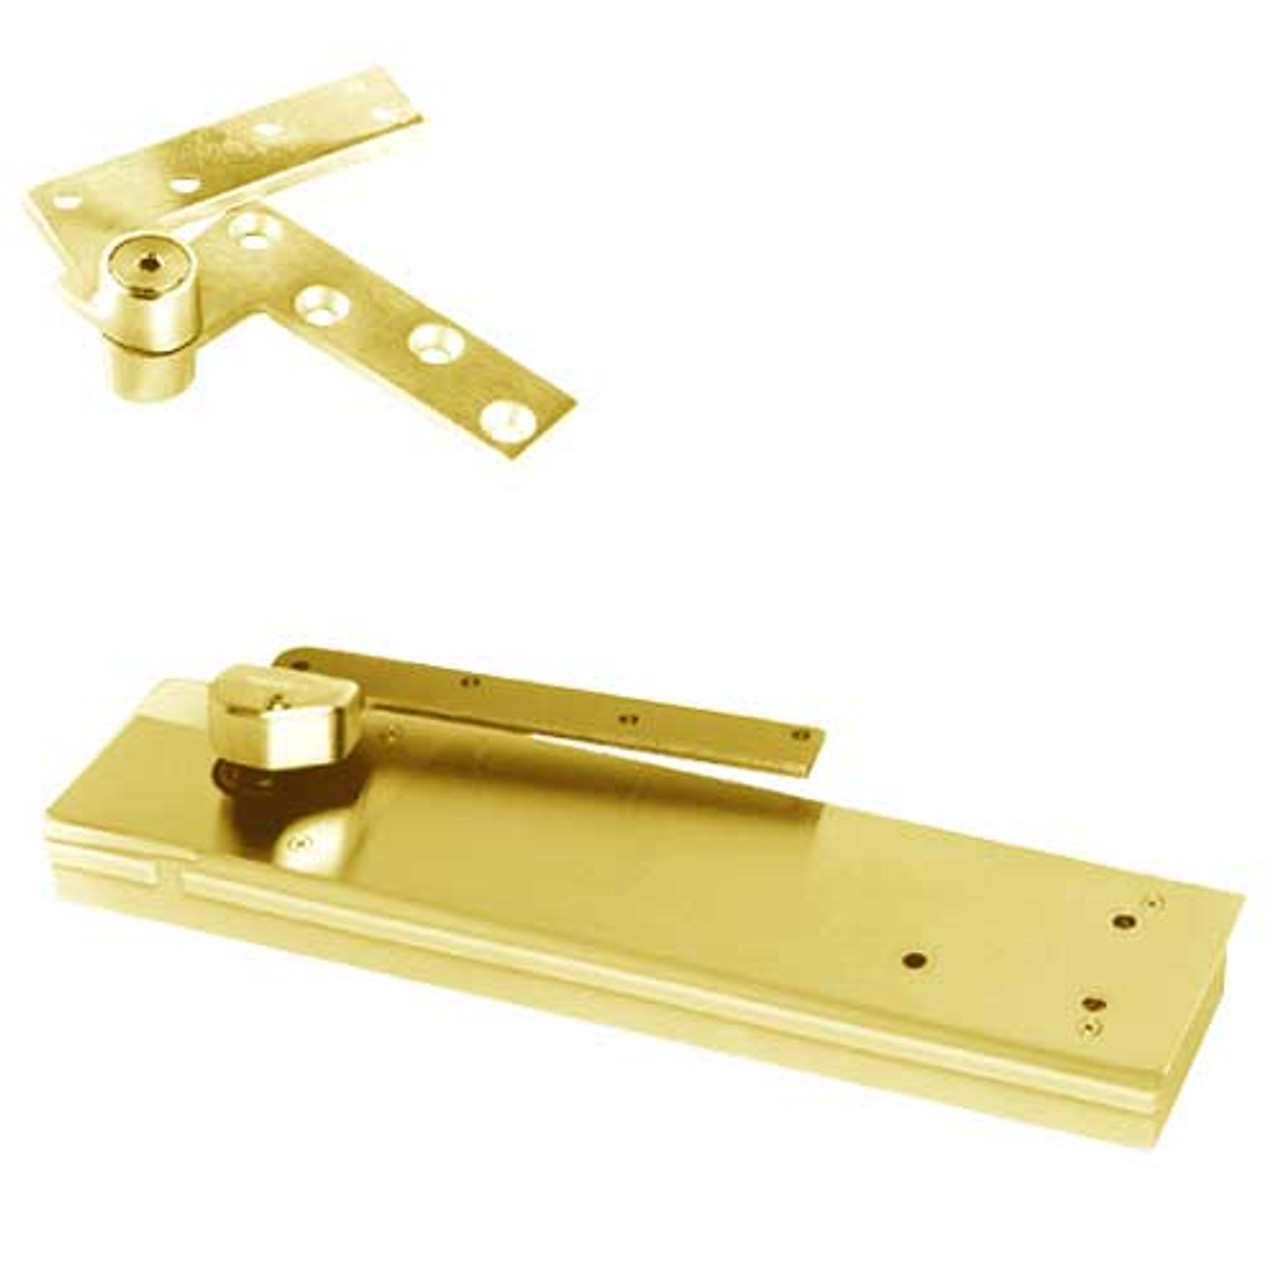 5104ABC180-LFP-LCC-LH-605 Rixson 51 Series 3/4" Offset Hung Shallow Depth Floor Closers in Bright Brass Finish